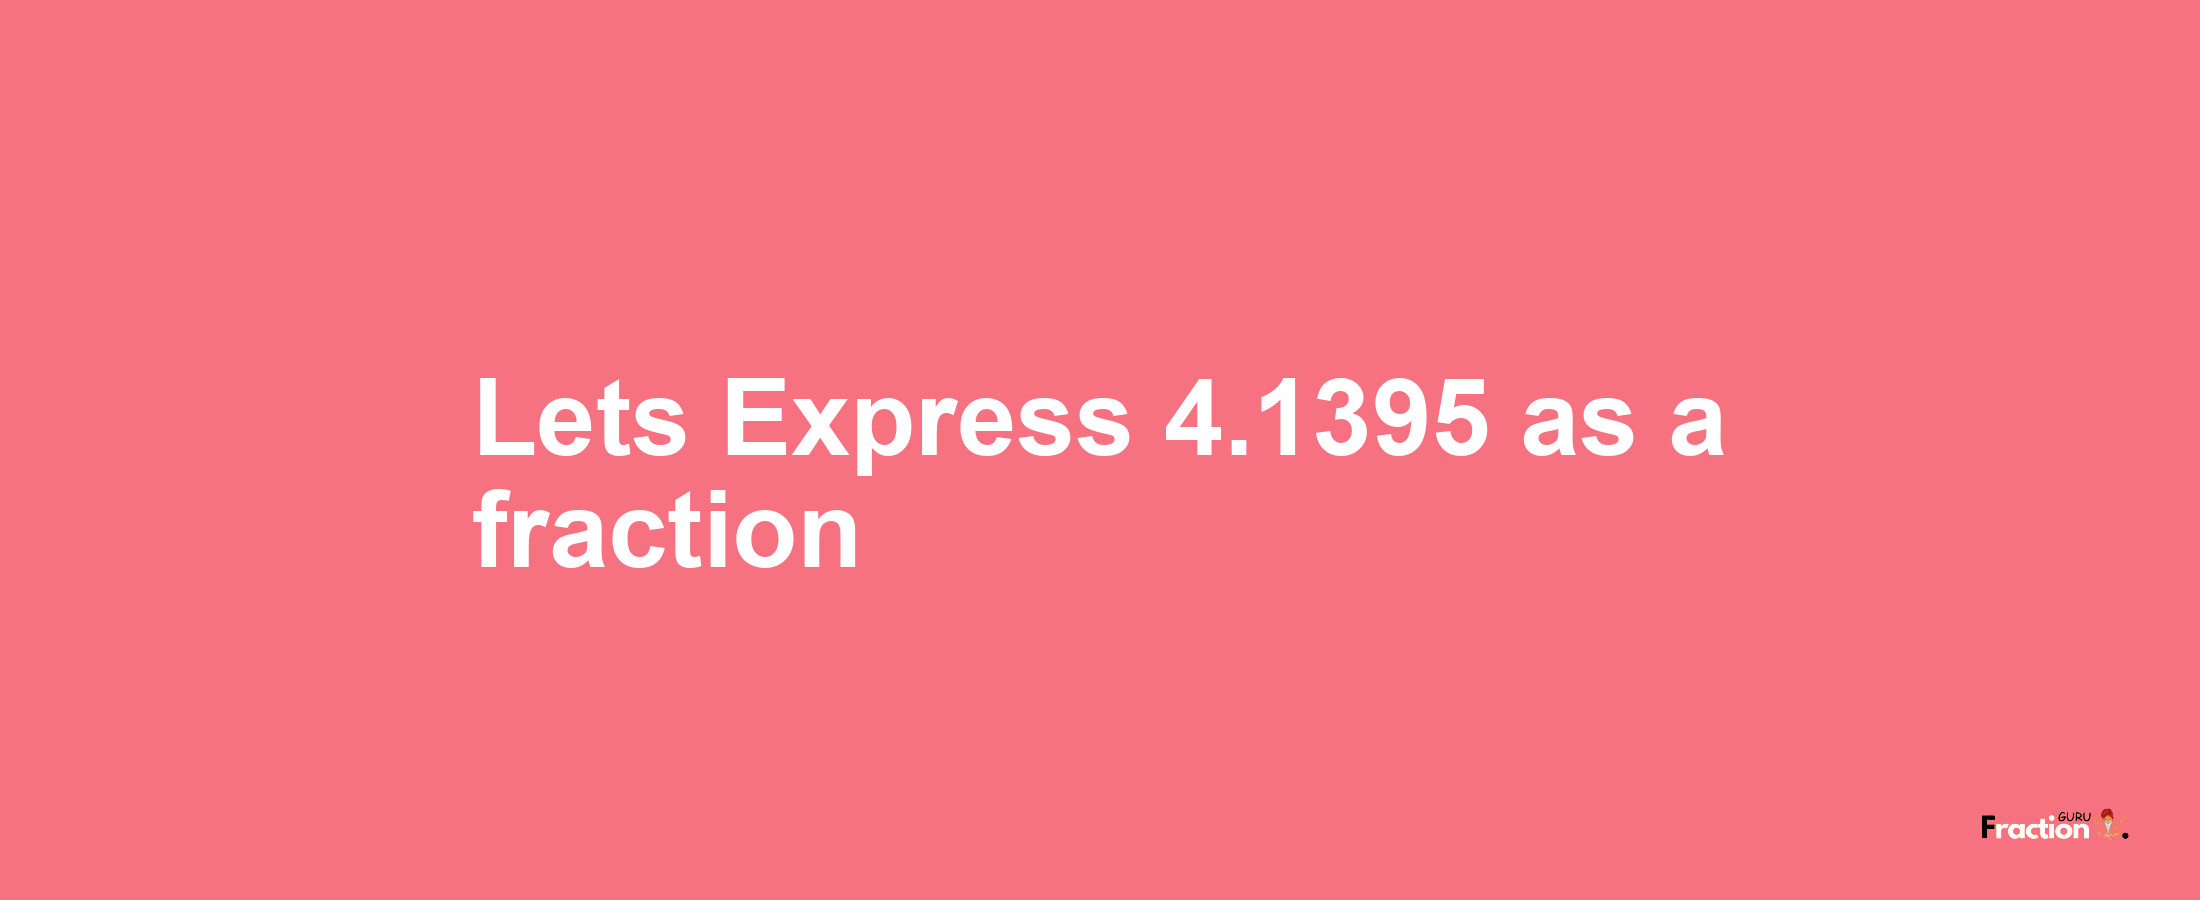 Lets Express 4.1395 as afraction